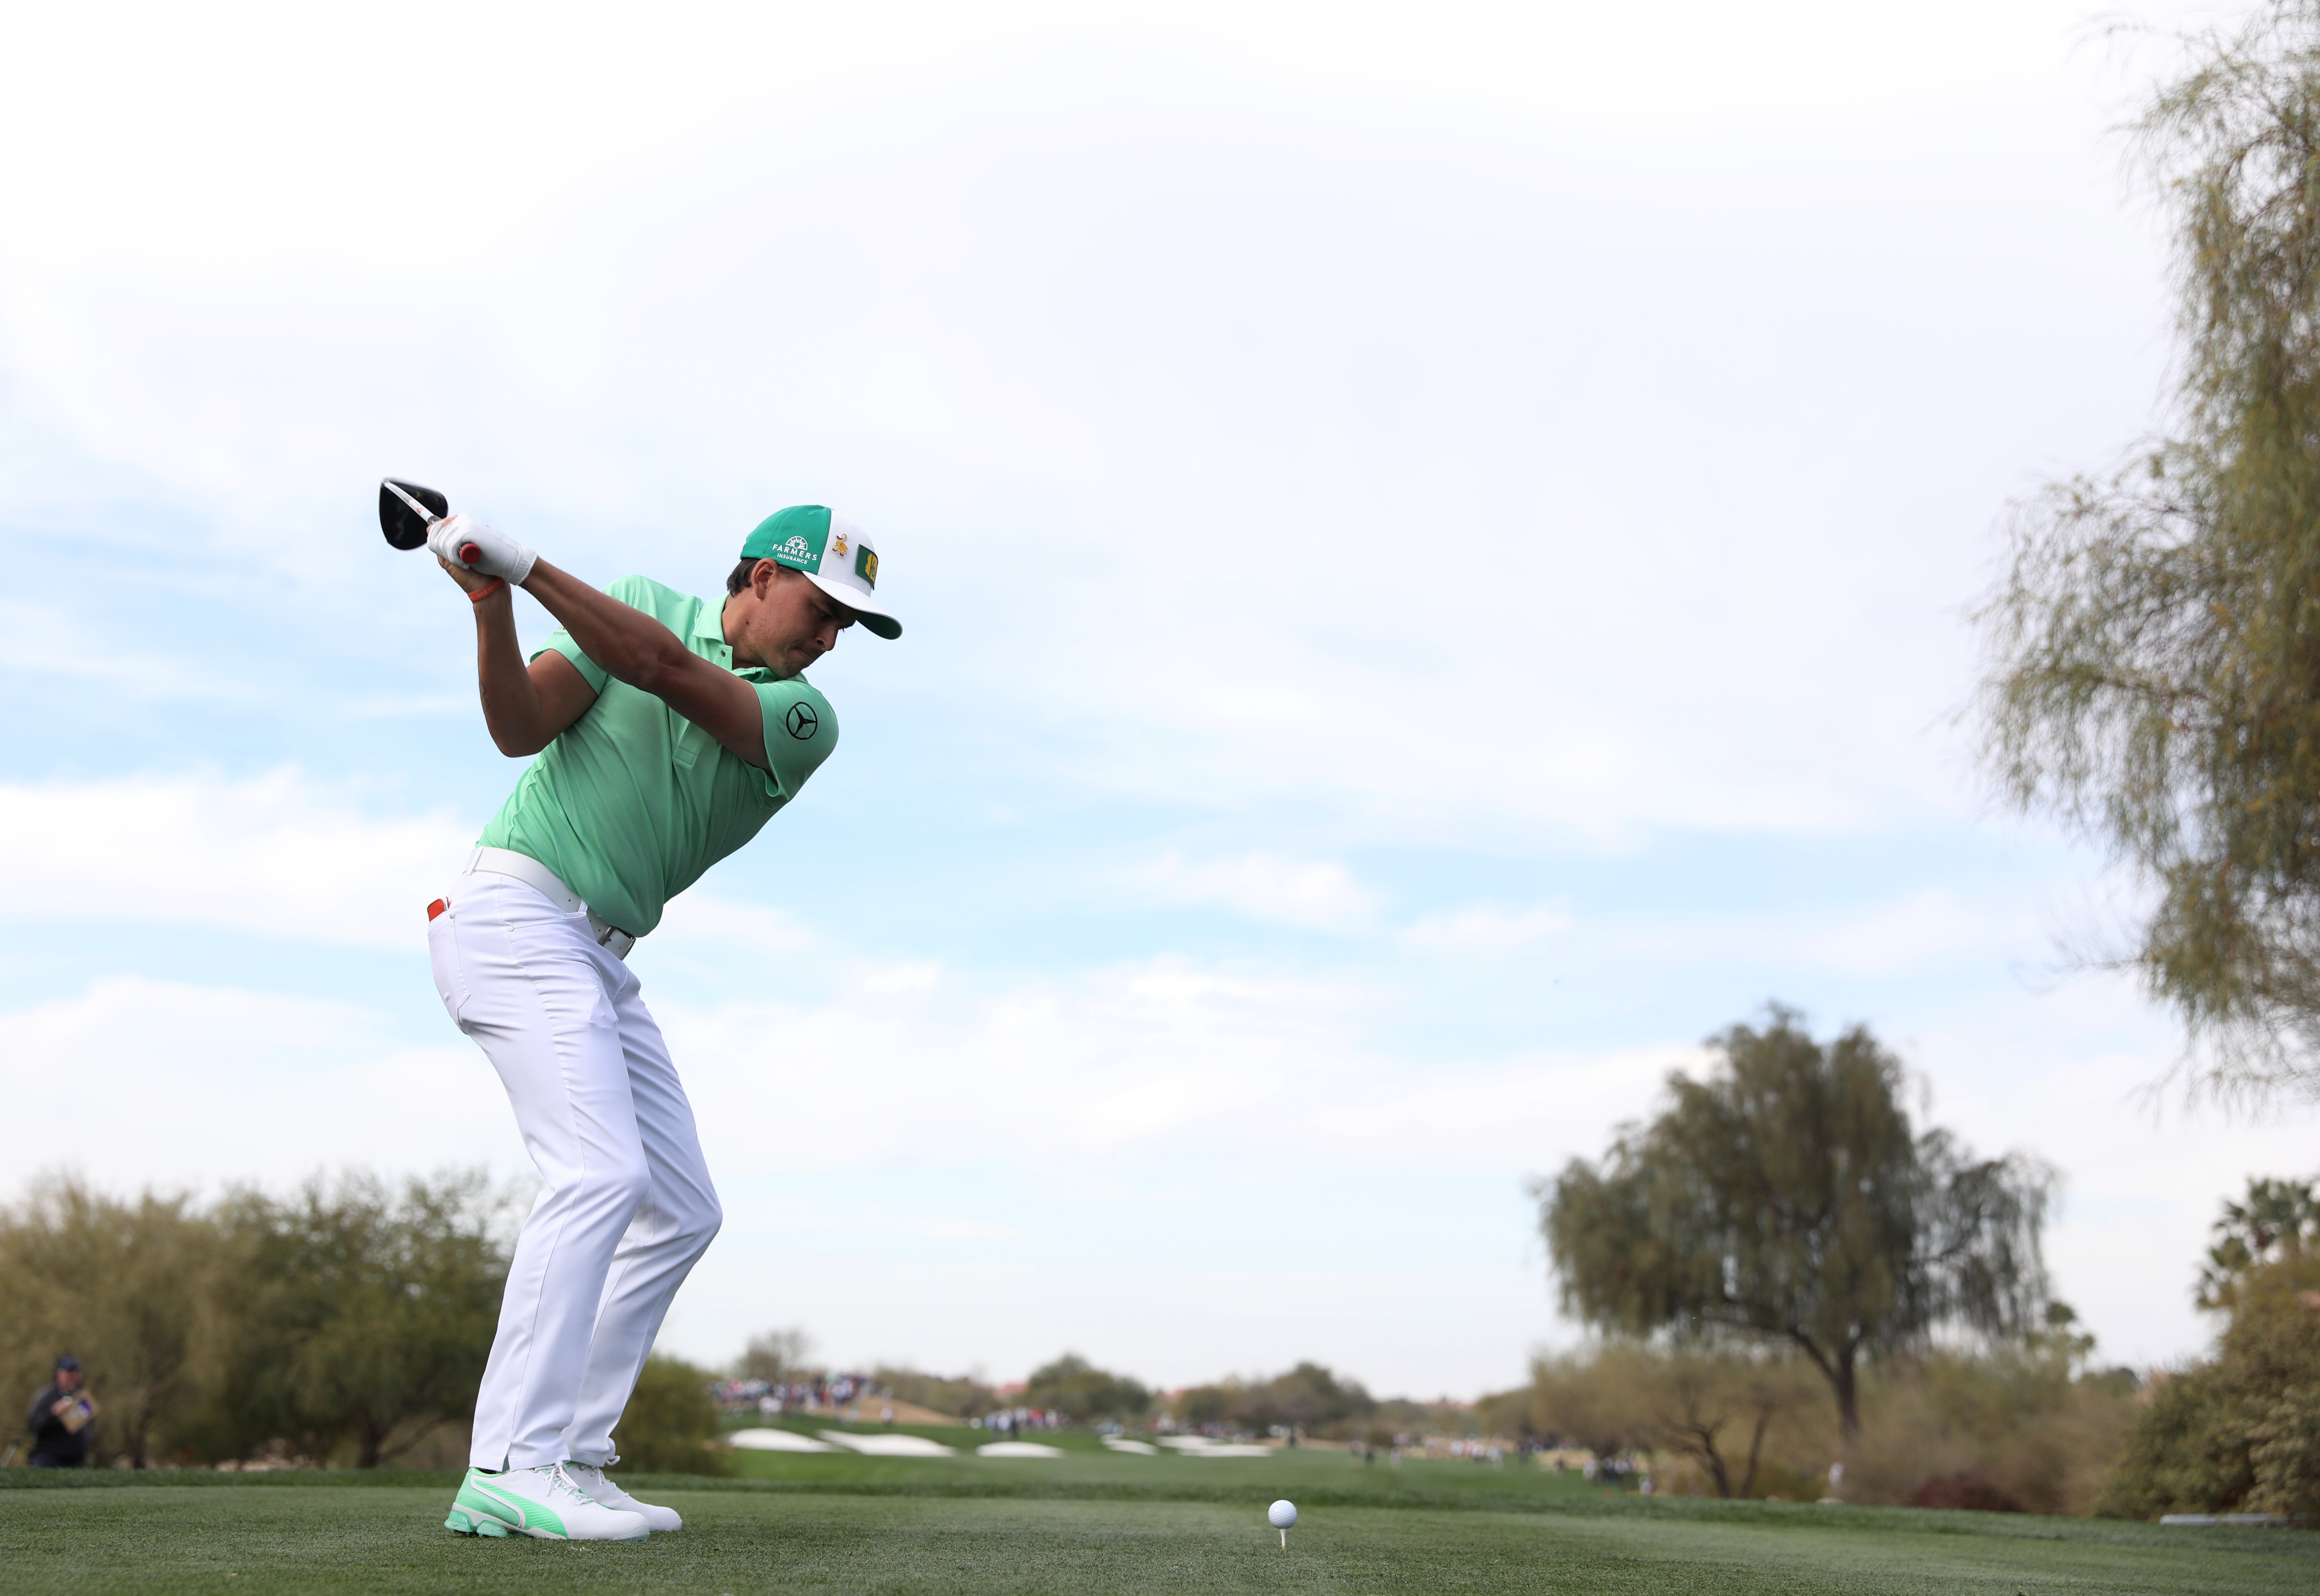 Rickie Fowler reveals the DISTANCE gains with his new TaylorMade TP5x